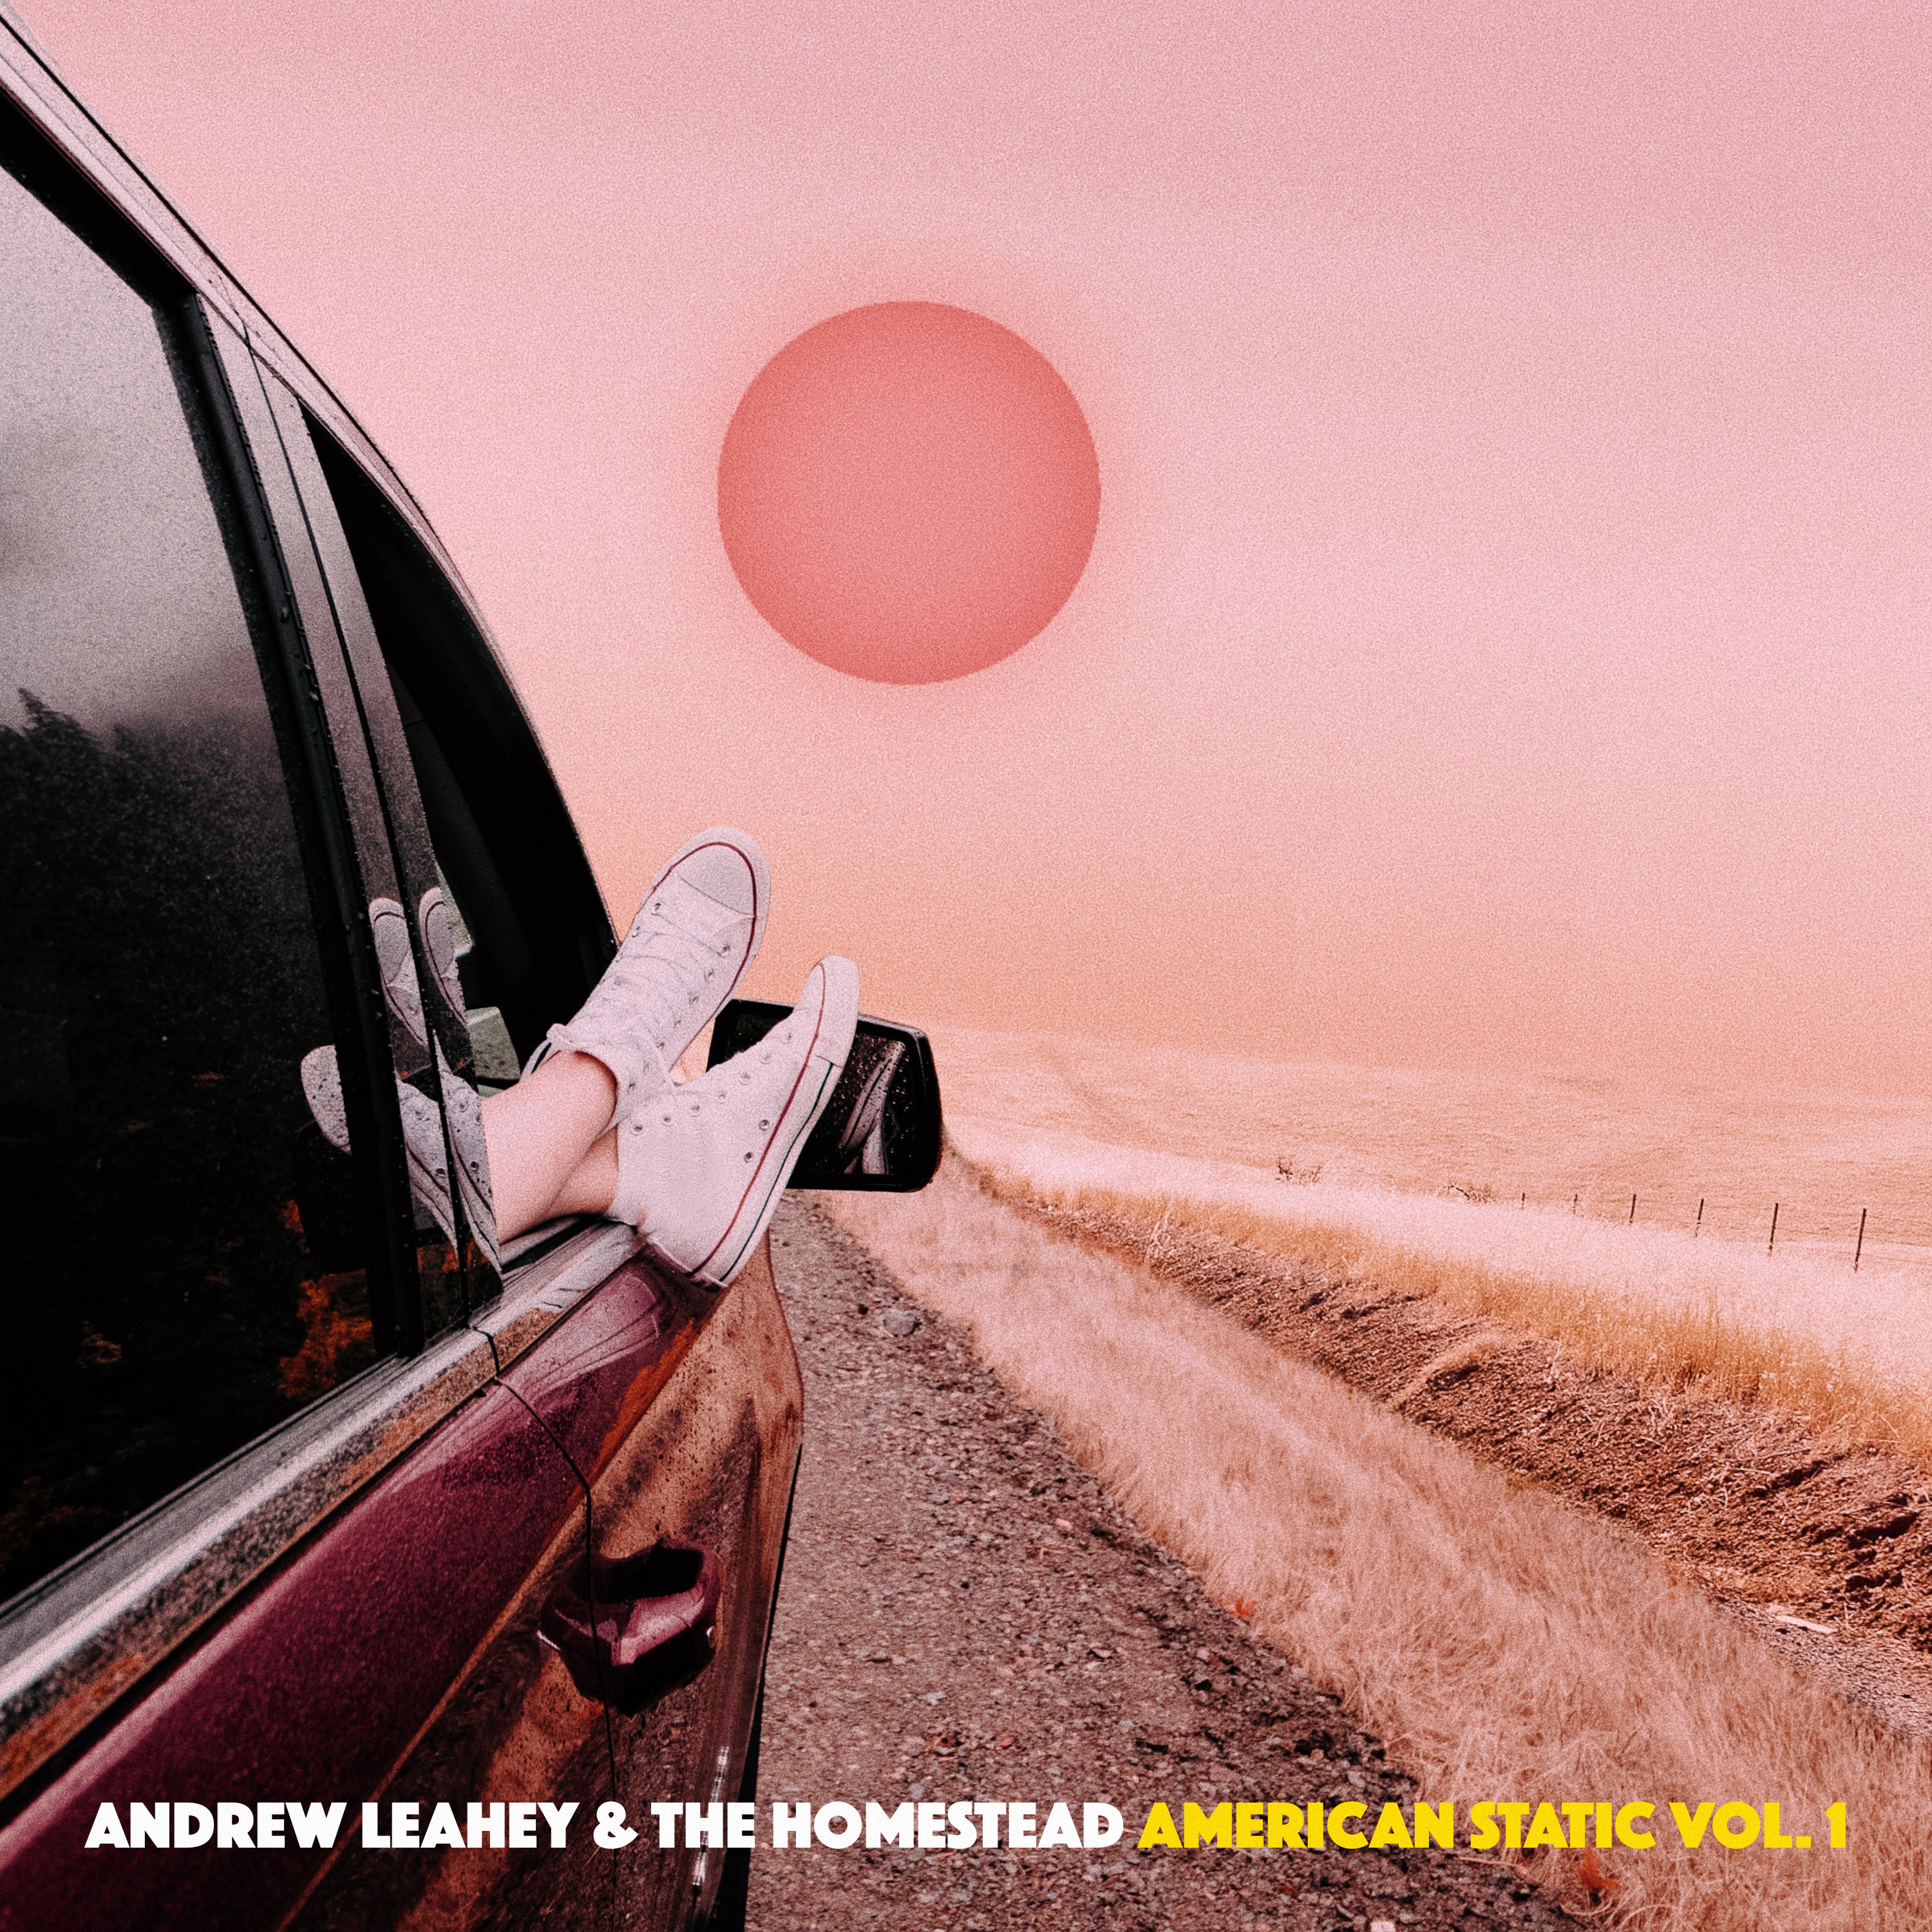 Andrew Leahey & The Homestead to Release American Static Vol 1 